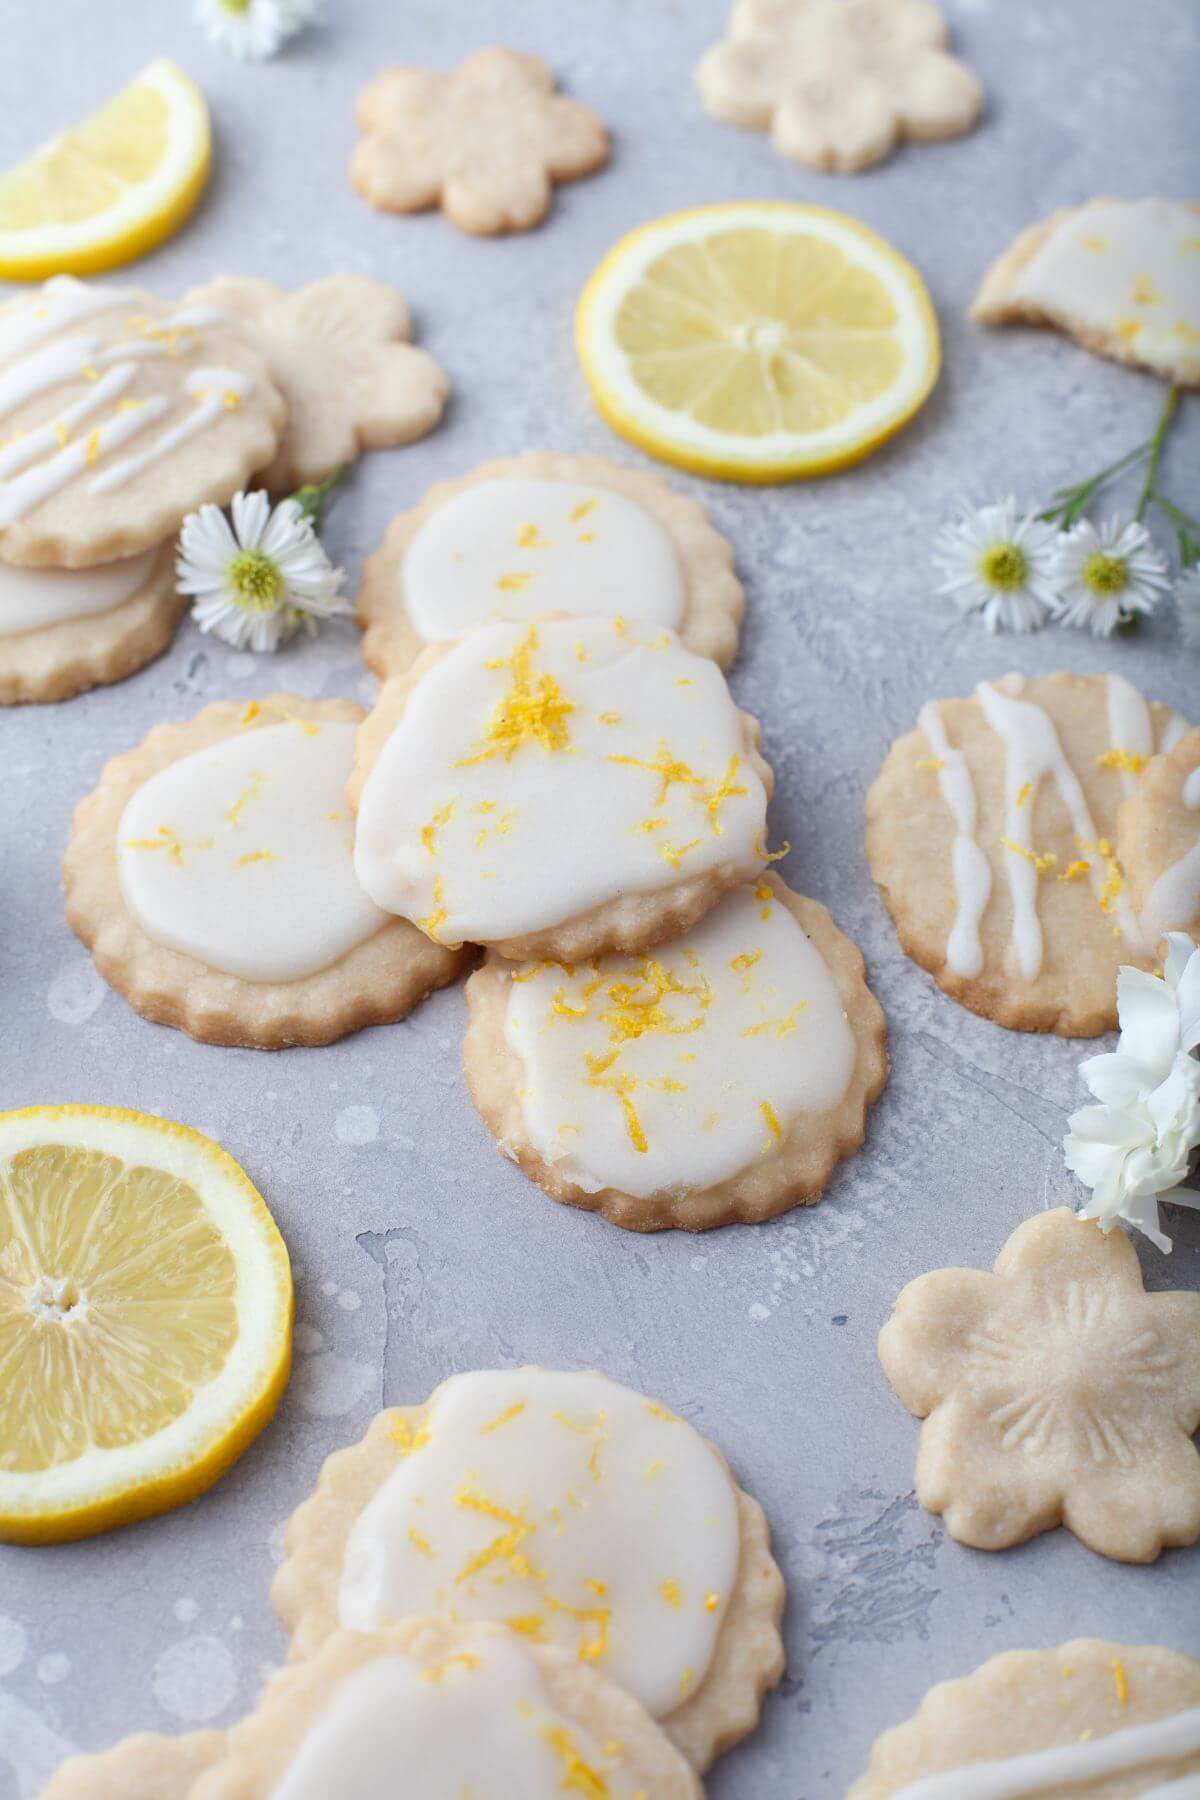 Iced cookies in different shapes are displayed with flowers and lemons.